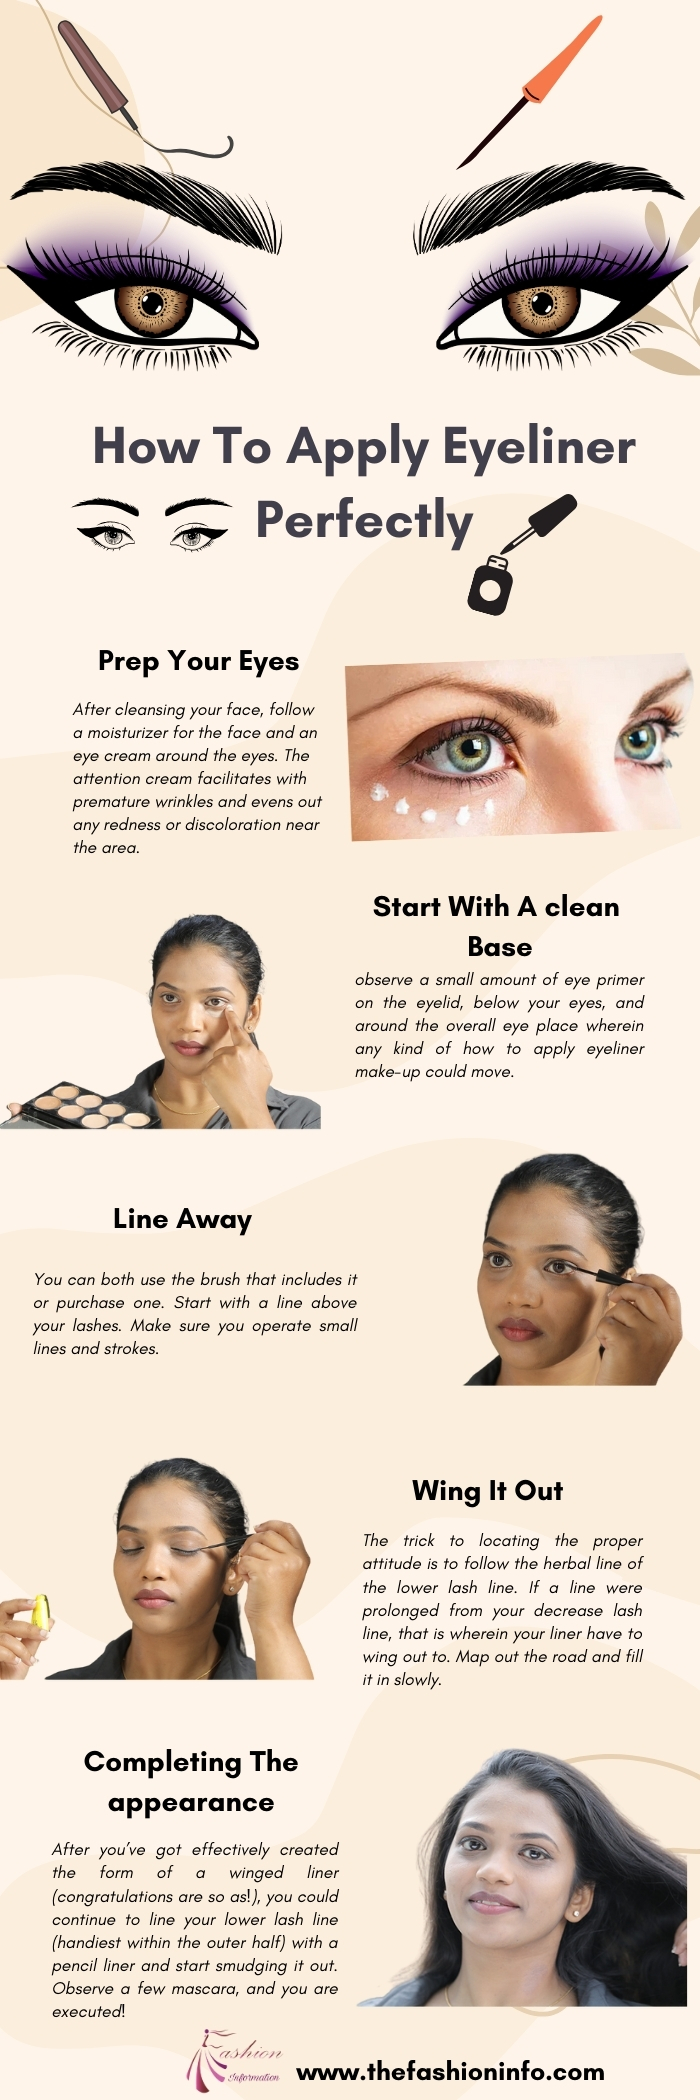 How To Apply Eyeliner Perfectly 